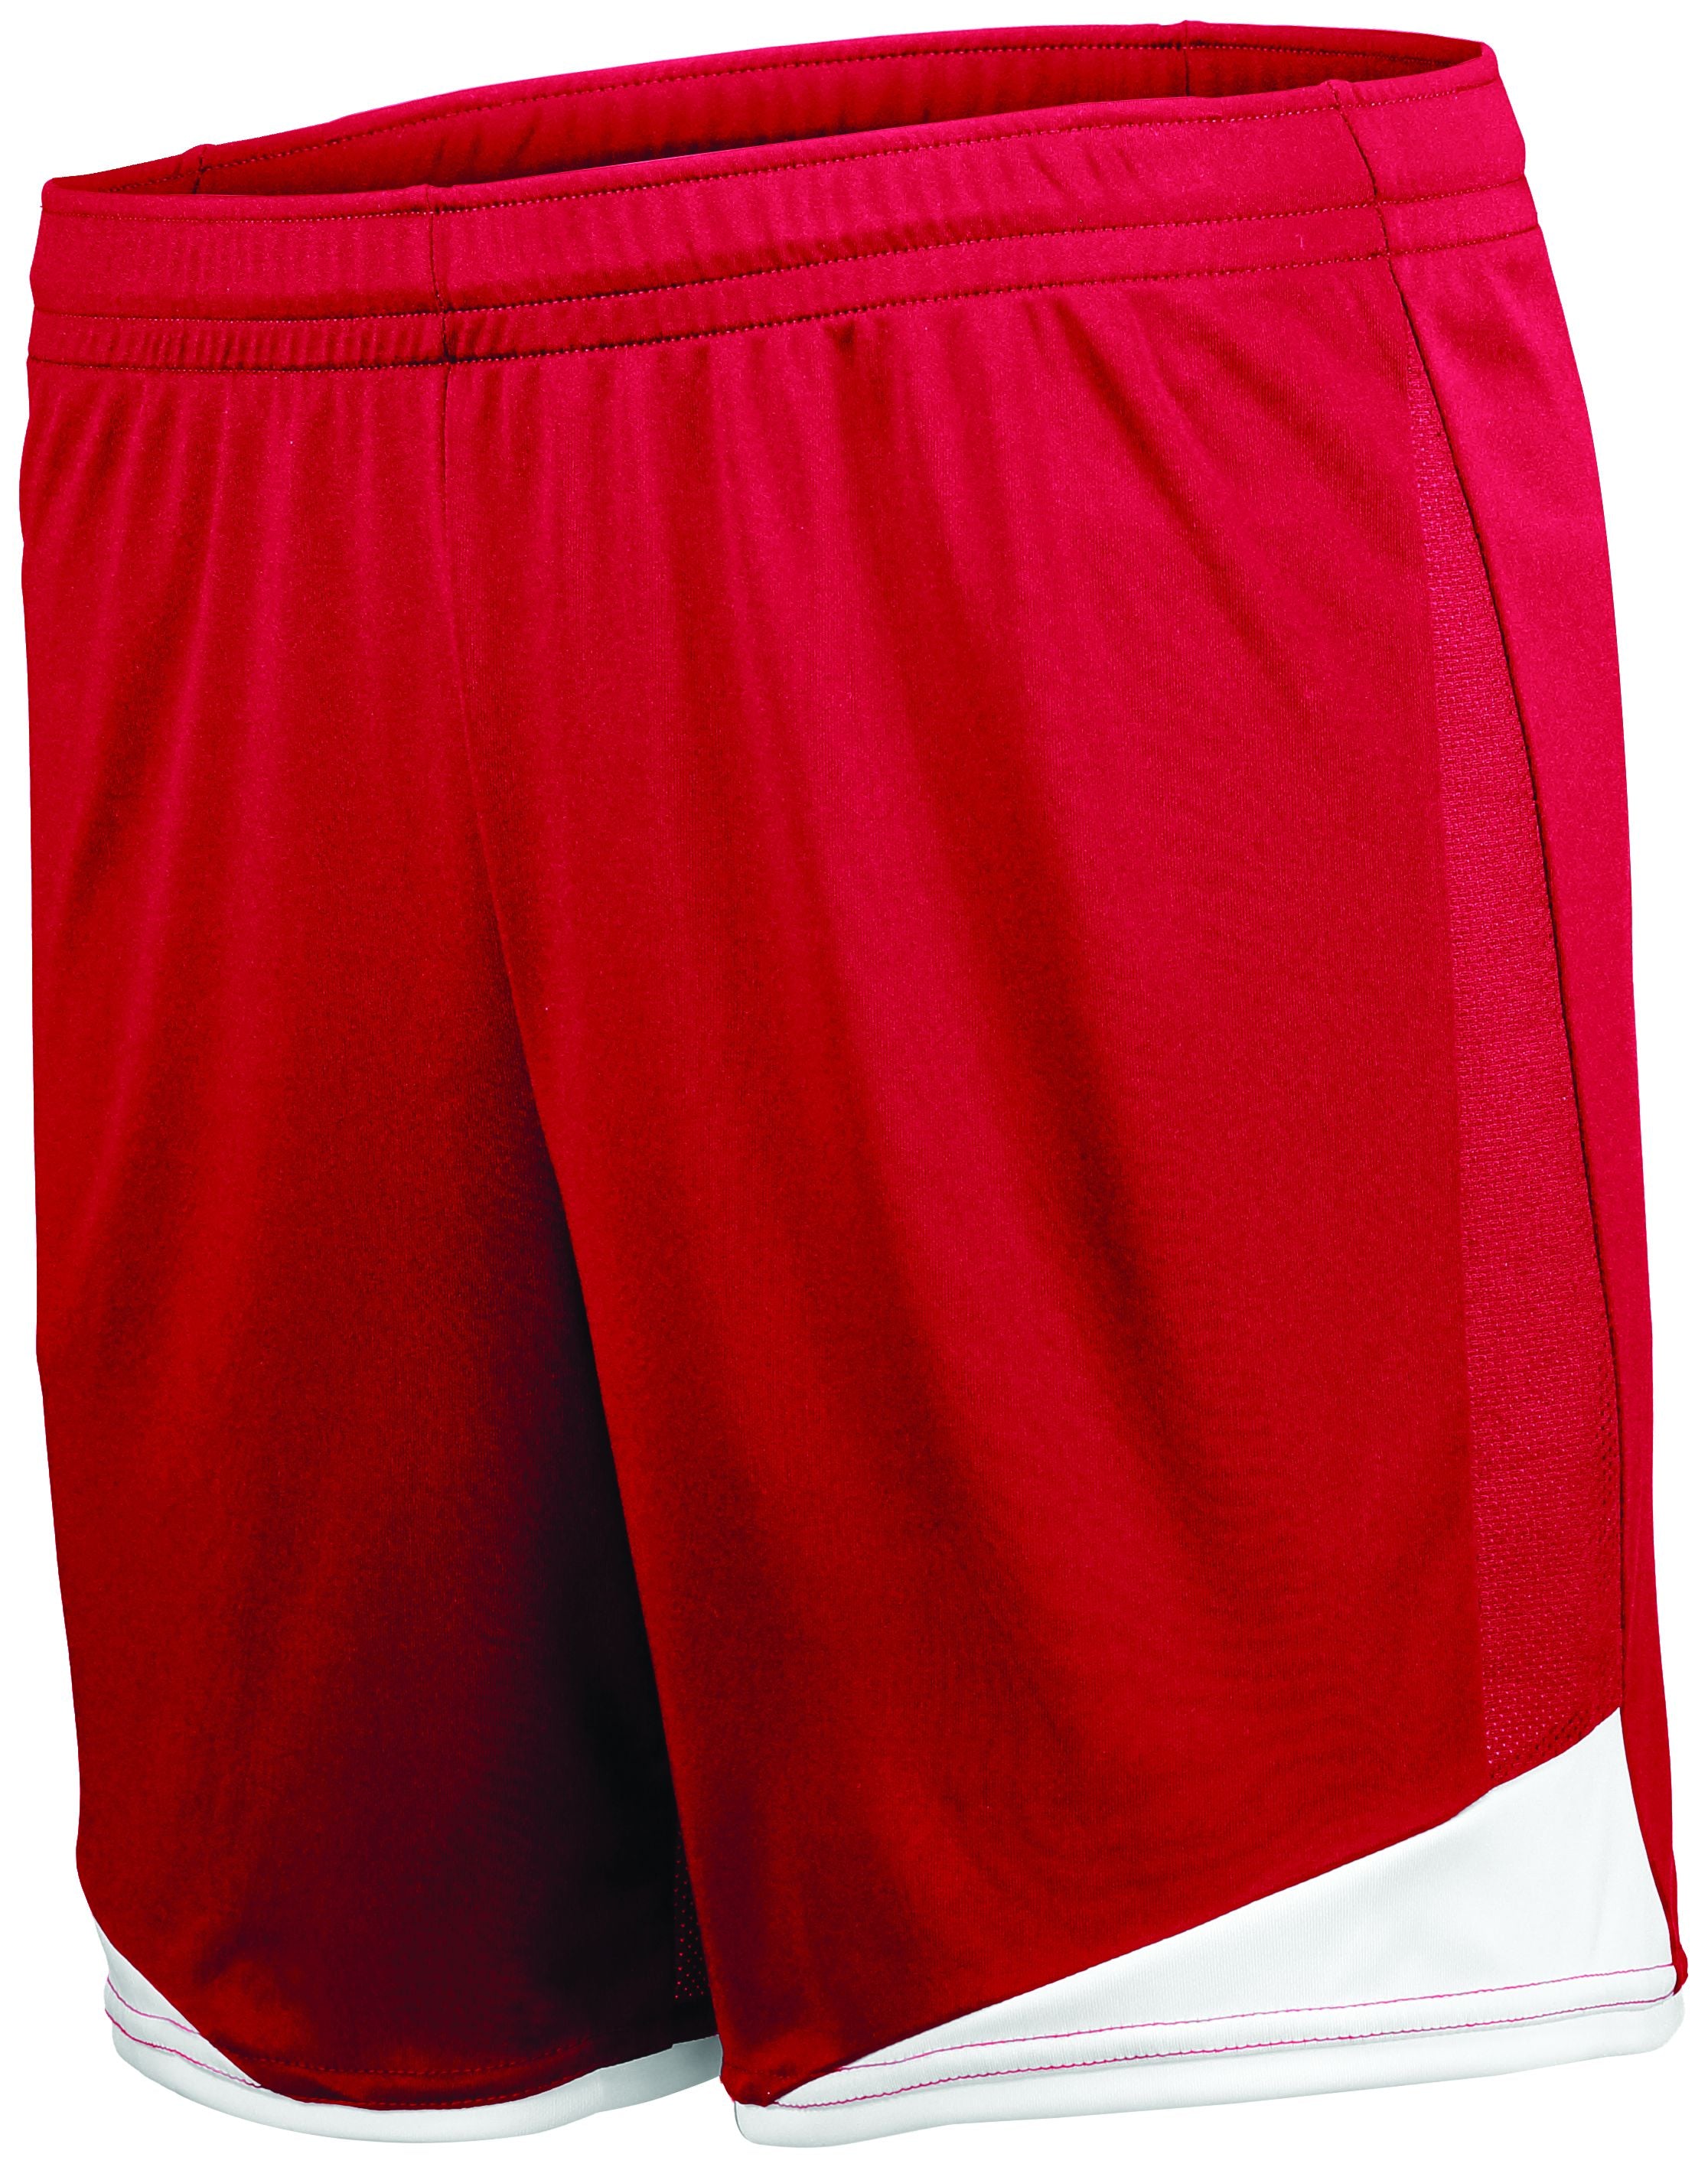 High 5 Ladies Stamford Soccer Shorts in Scarlet/White  -Part of the Ladies, Ladies-Shorts, High5-Products, Soccer, All-Sports-1 product lines at KanaleyCreations.com